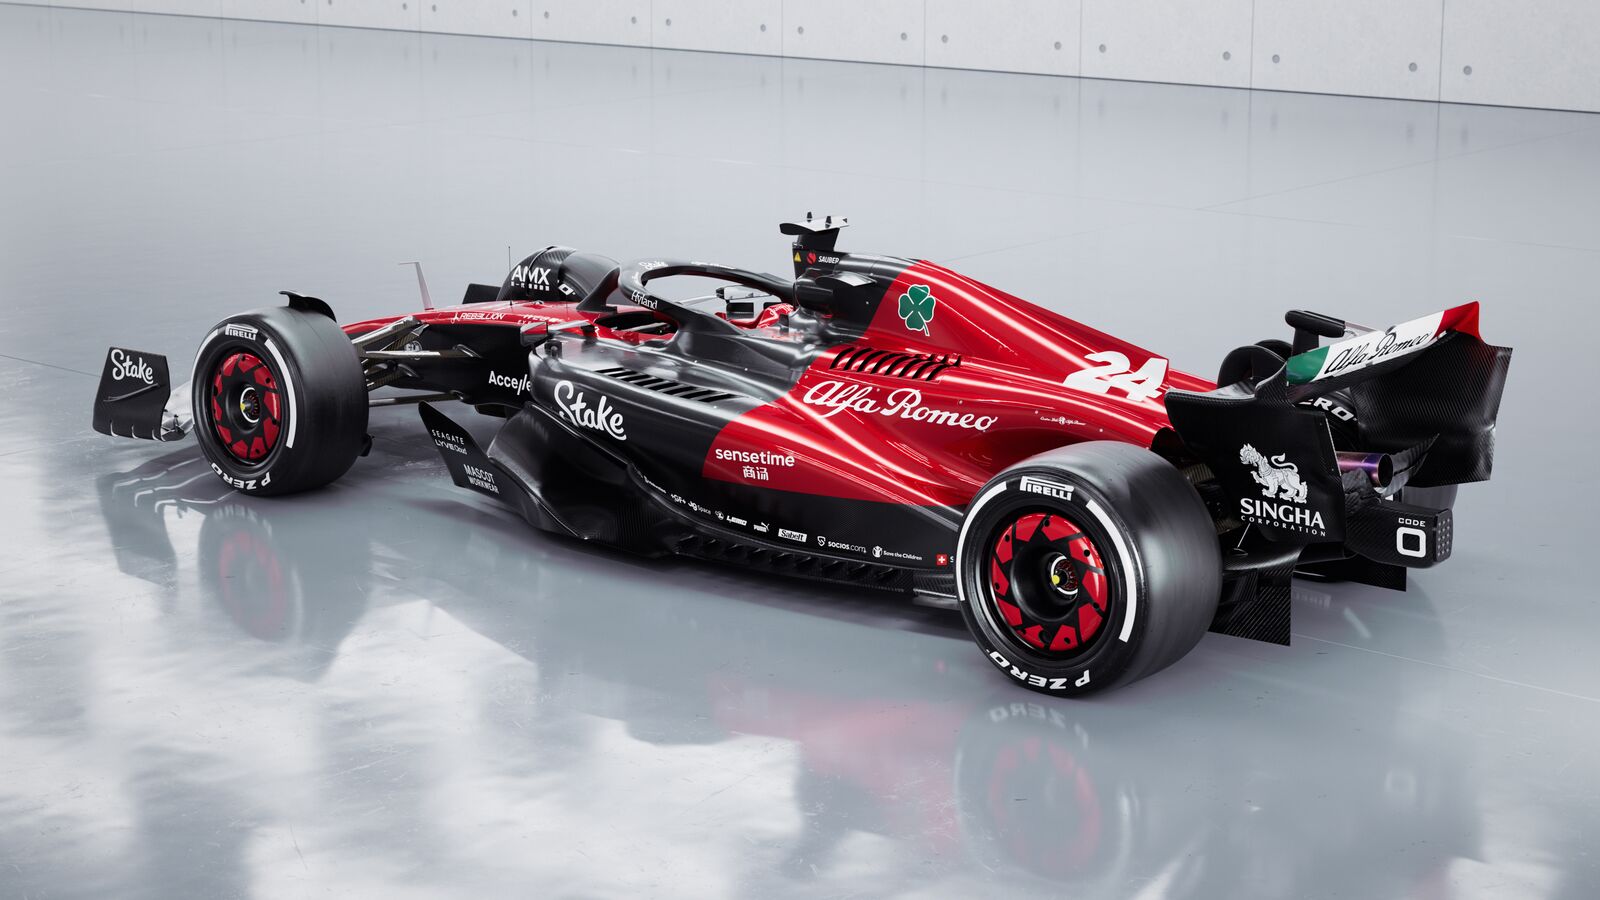 1st LOOK: Alfa Romeo show off striking new livery for F1 2023